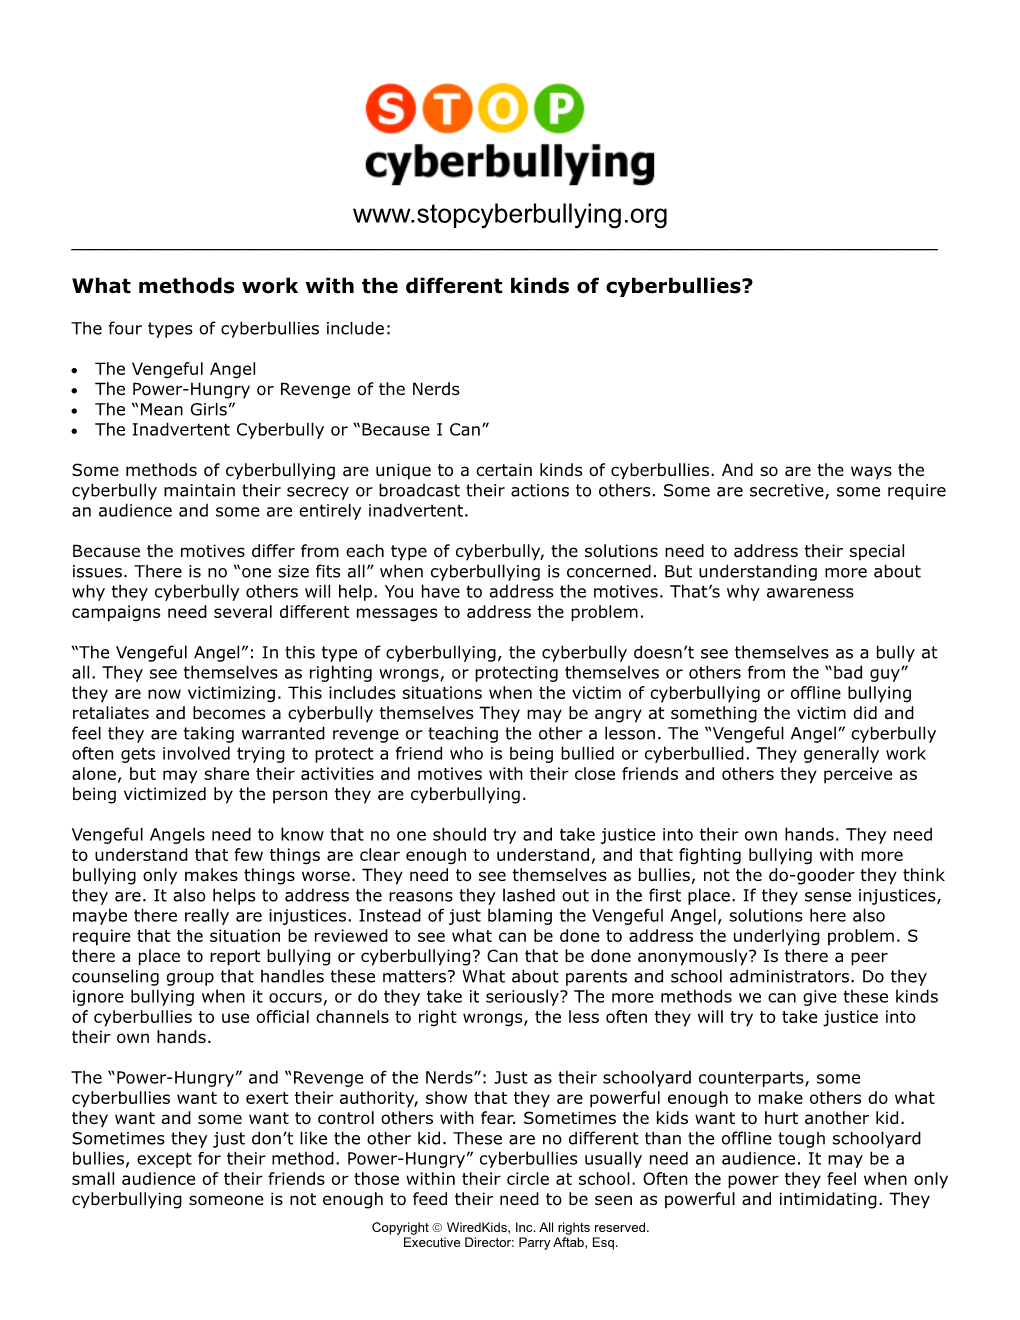 What Methods Work with the Different Kinds of Cyberbullies?